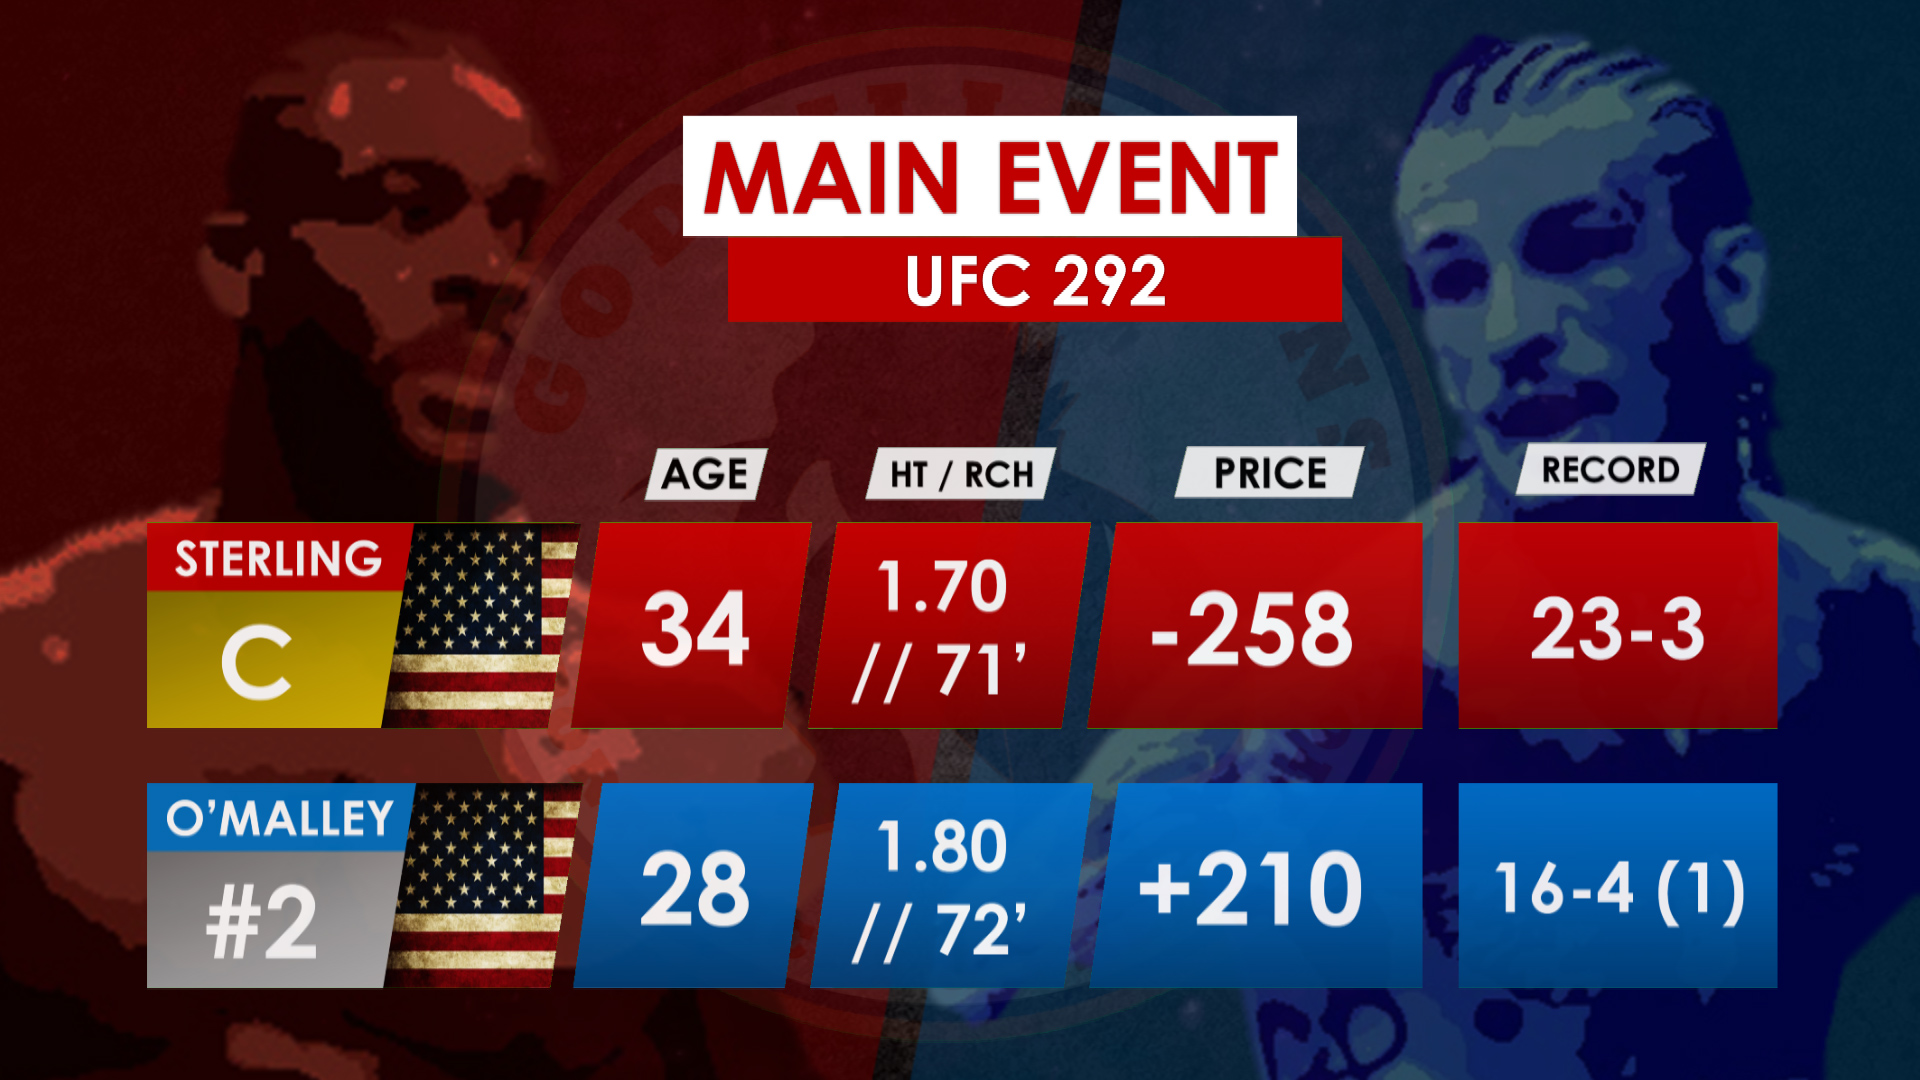 UFC 292: Sterling vs O’Malley tale of the tape